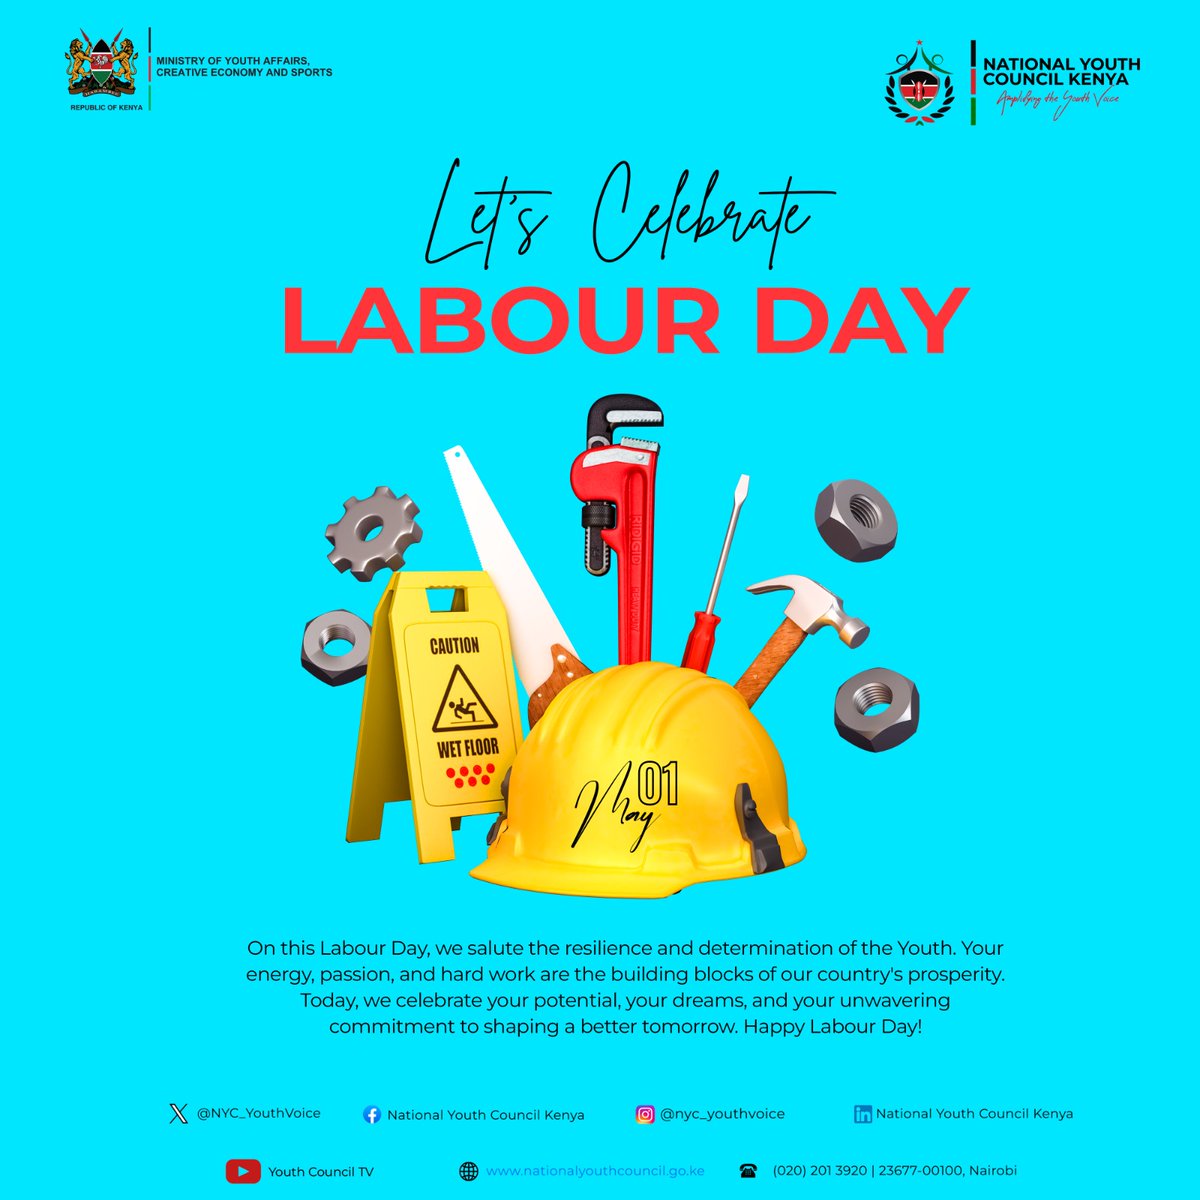 Happy Labour Day from the National Youth Council fraternity. As we commemorate this day, let's reflect on the invaluable contributions of our youth towards our country's growth and development. #LabourDay2024